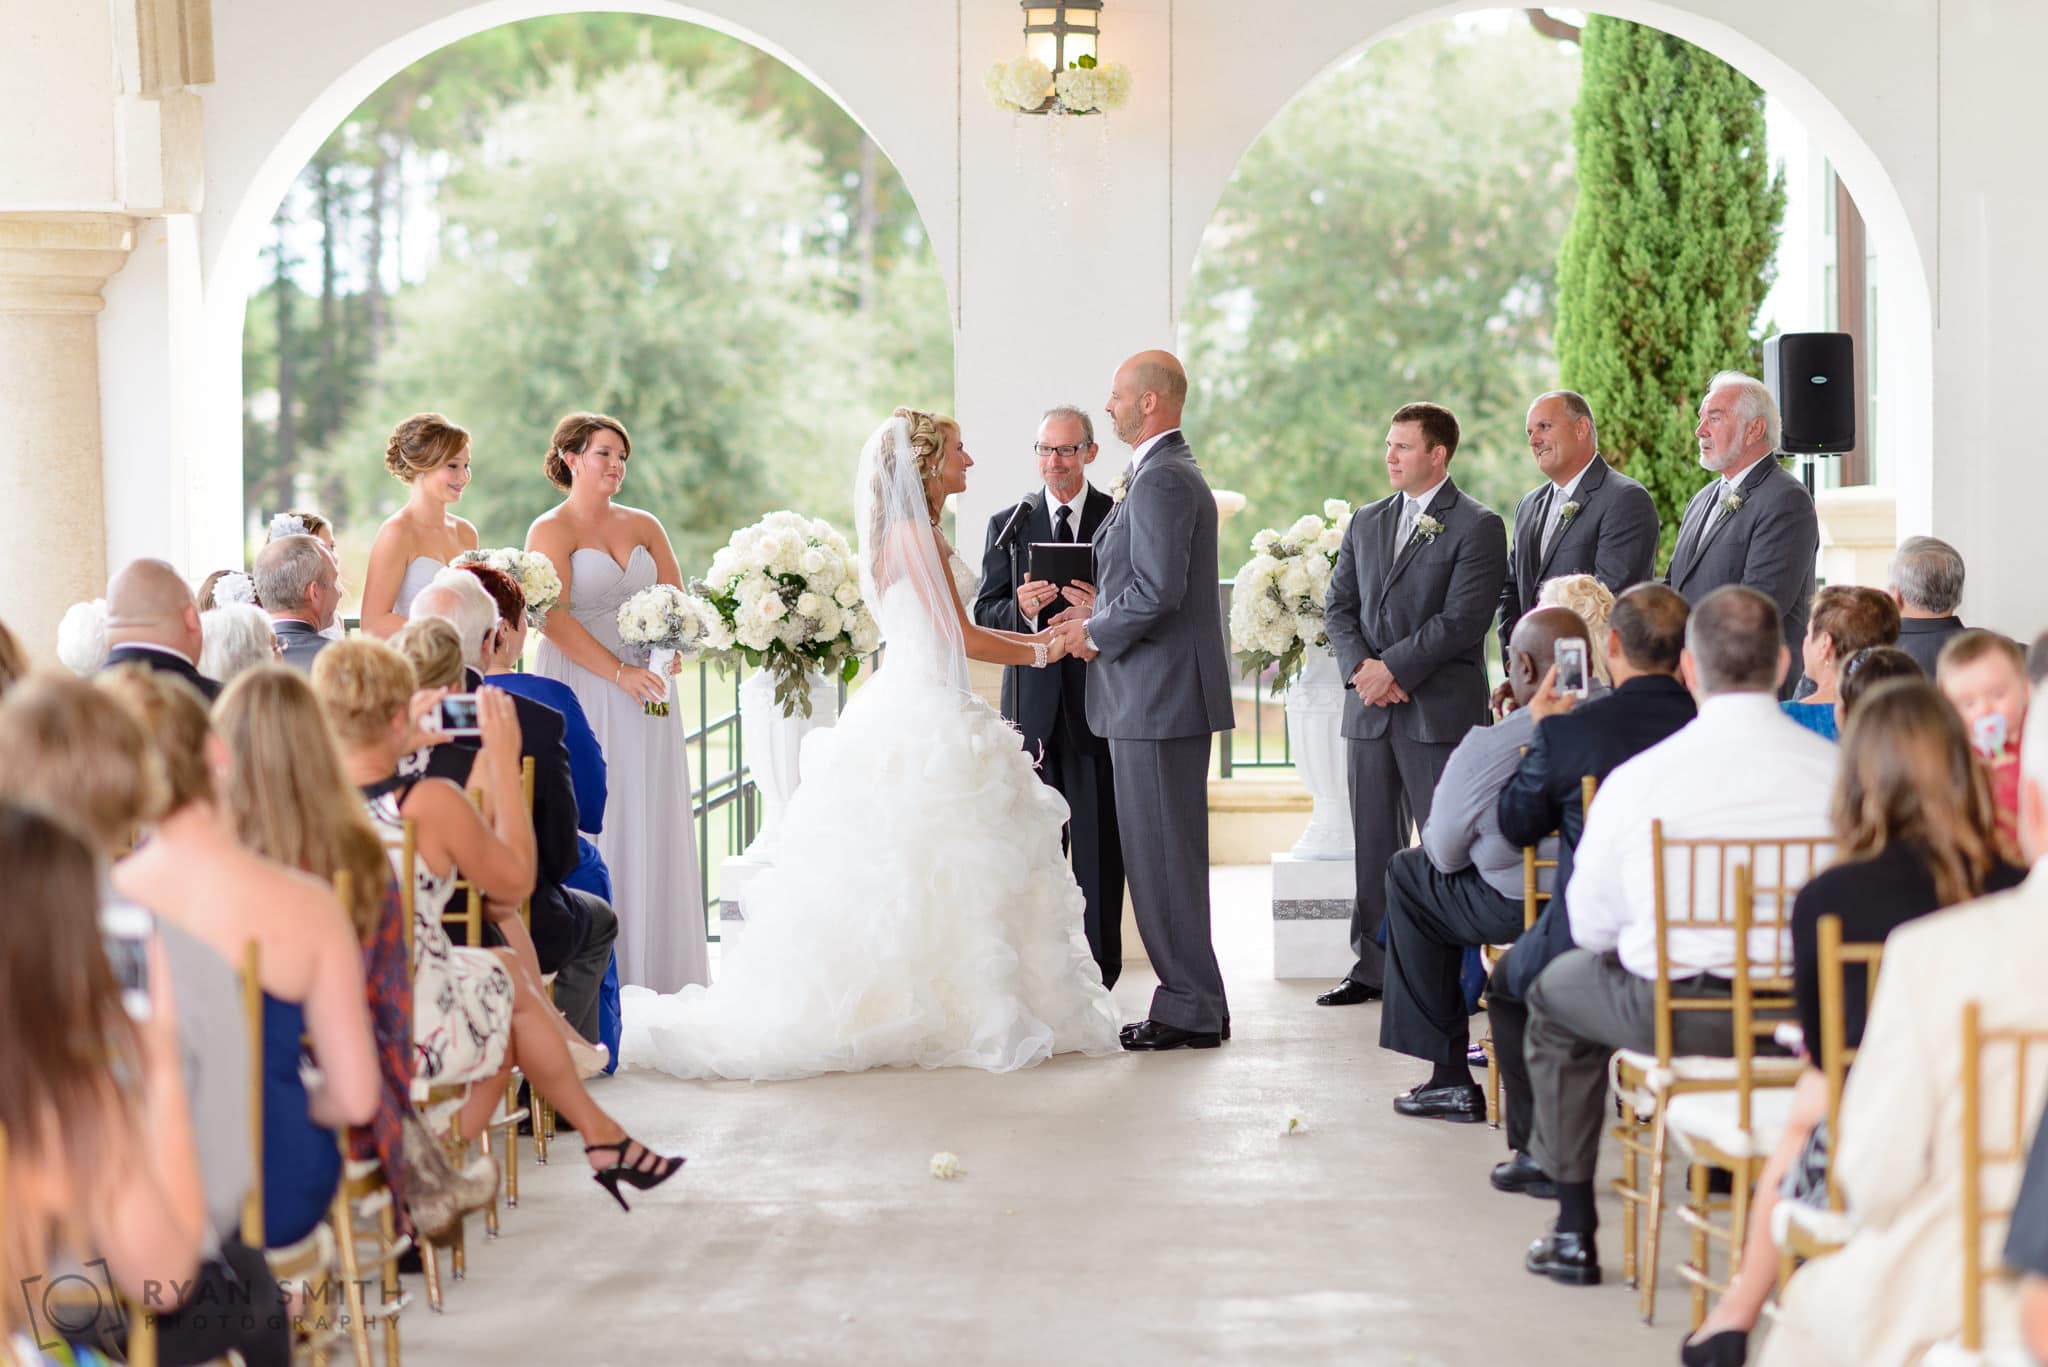 Bride and groom giving their vows -